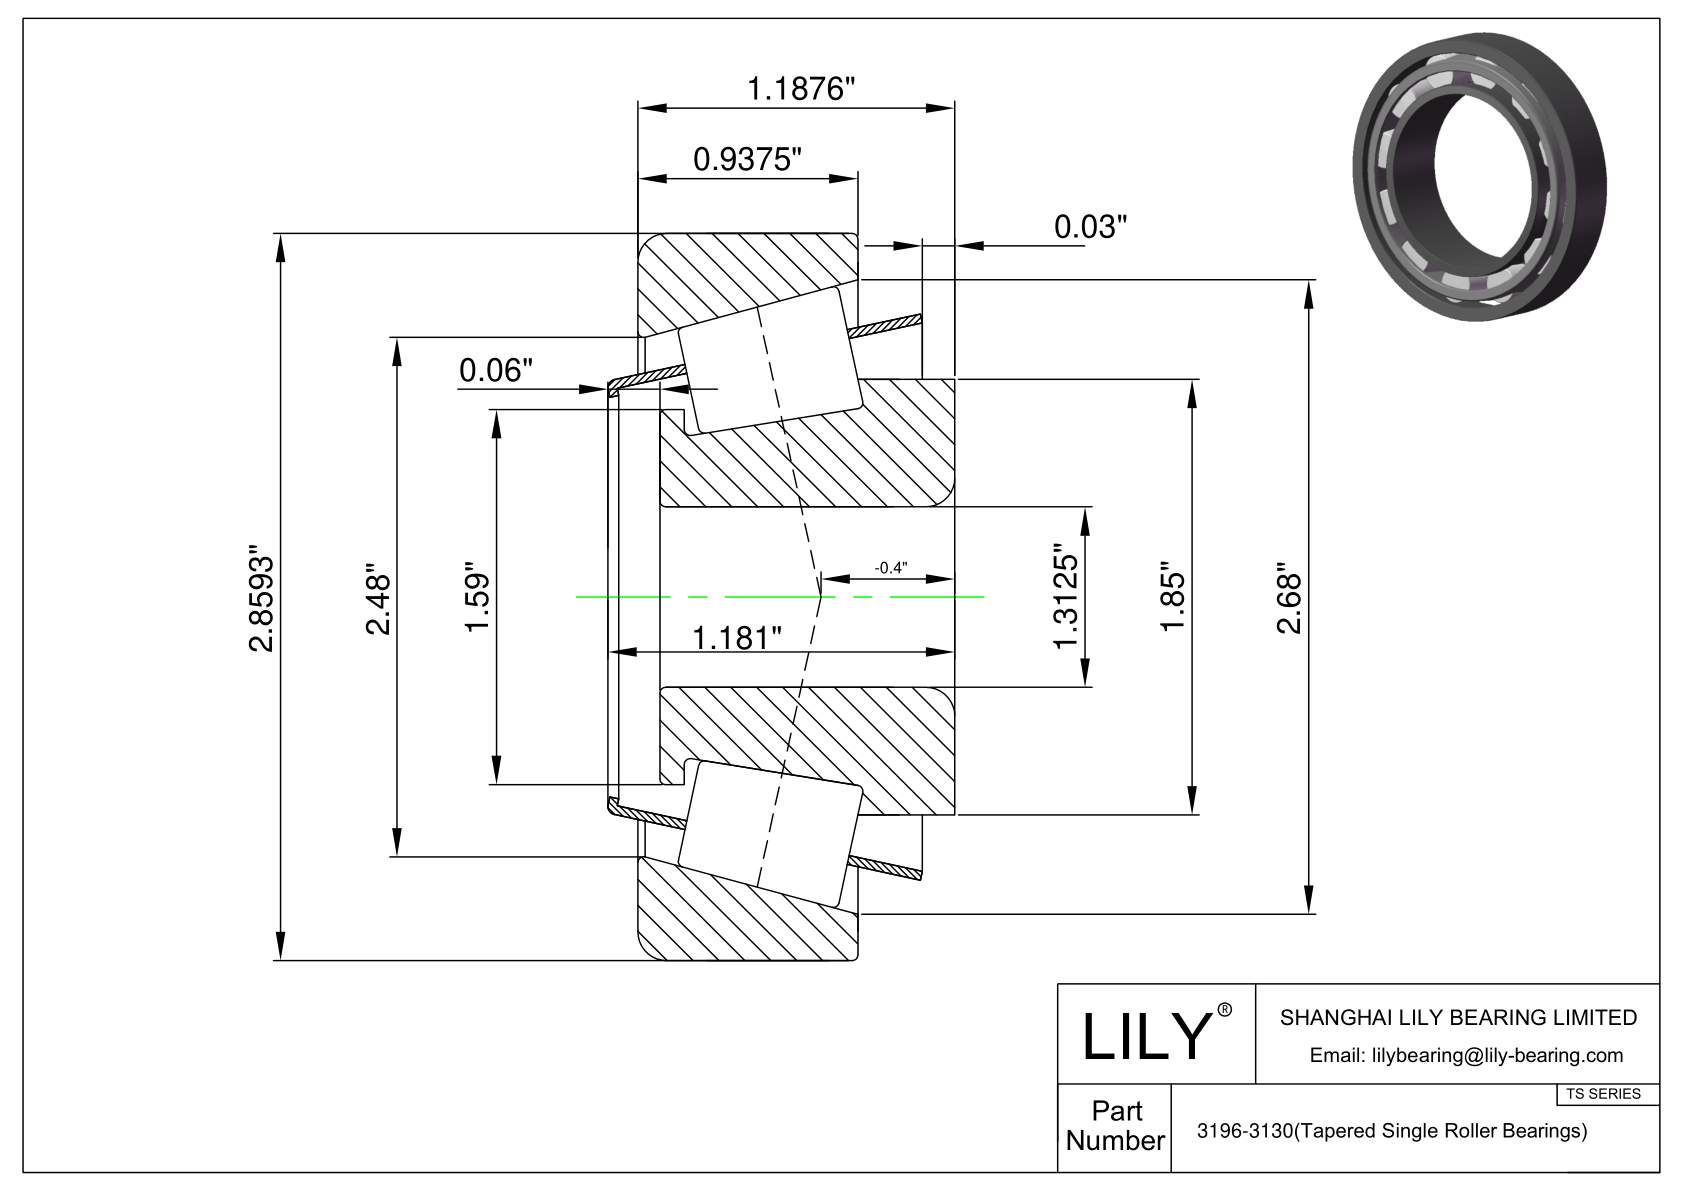 3196-3130 TS (Tapered Single Roller Bearings) (Imperial) cad drawing